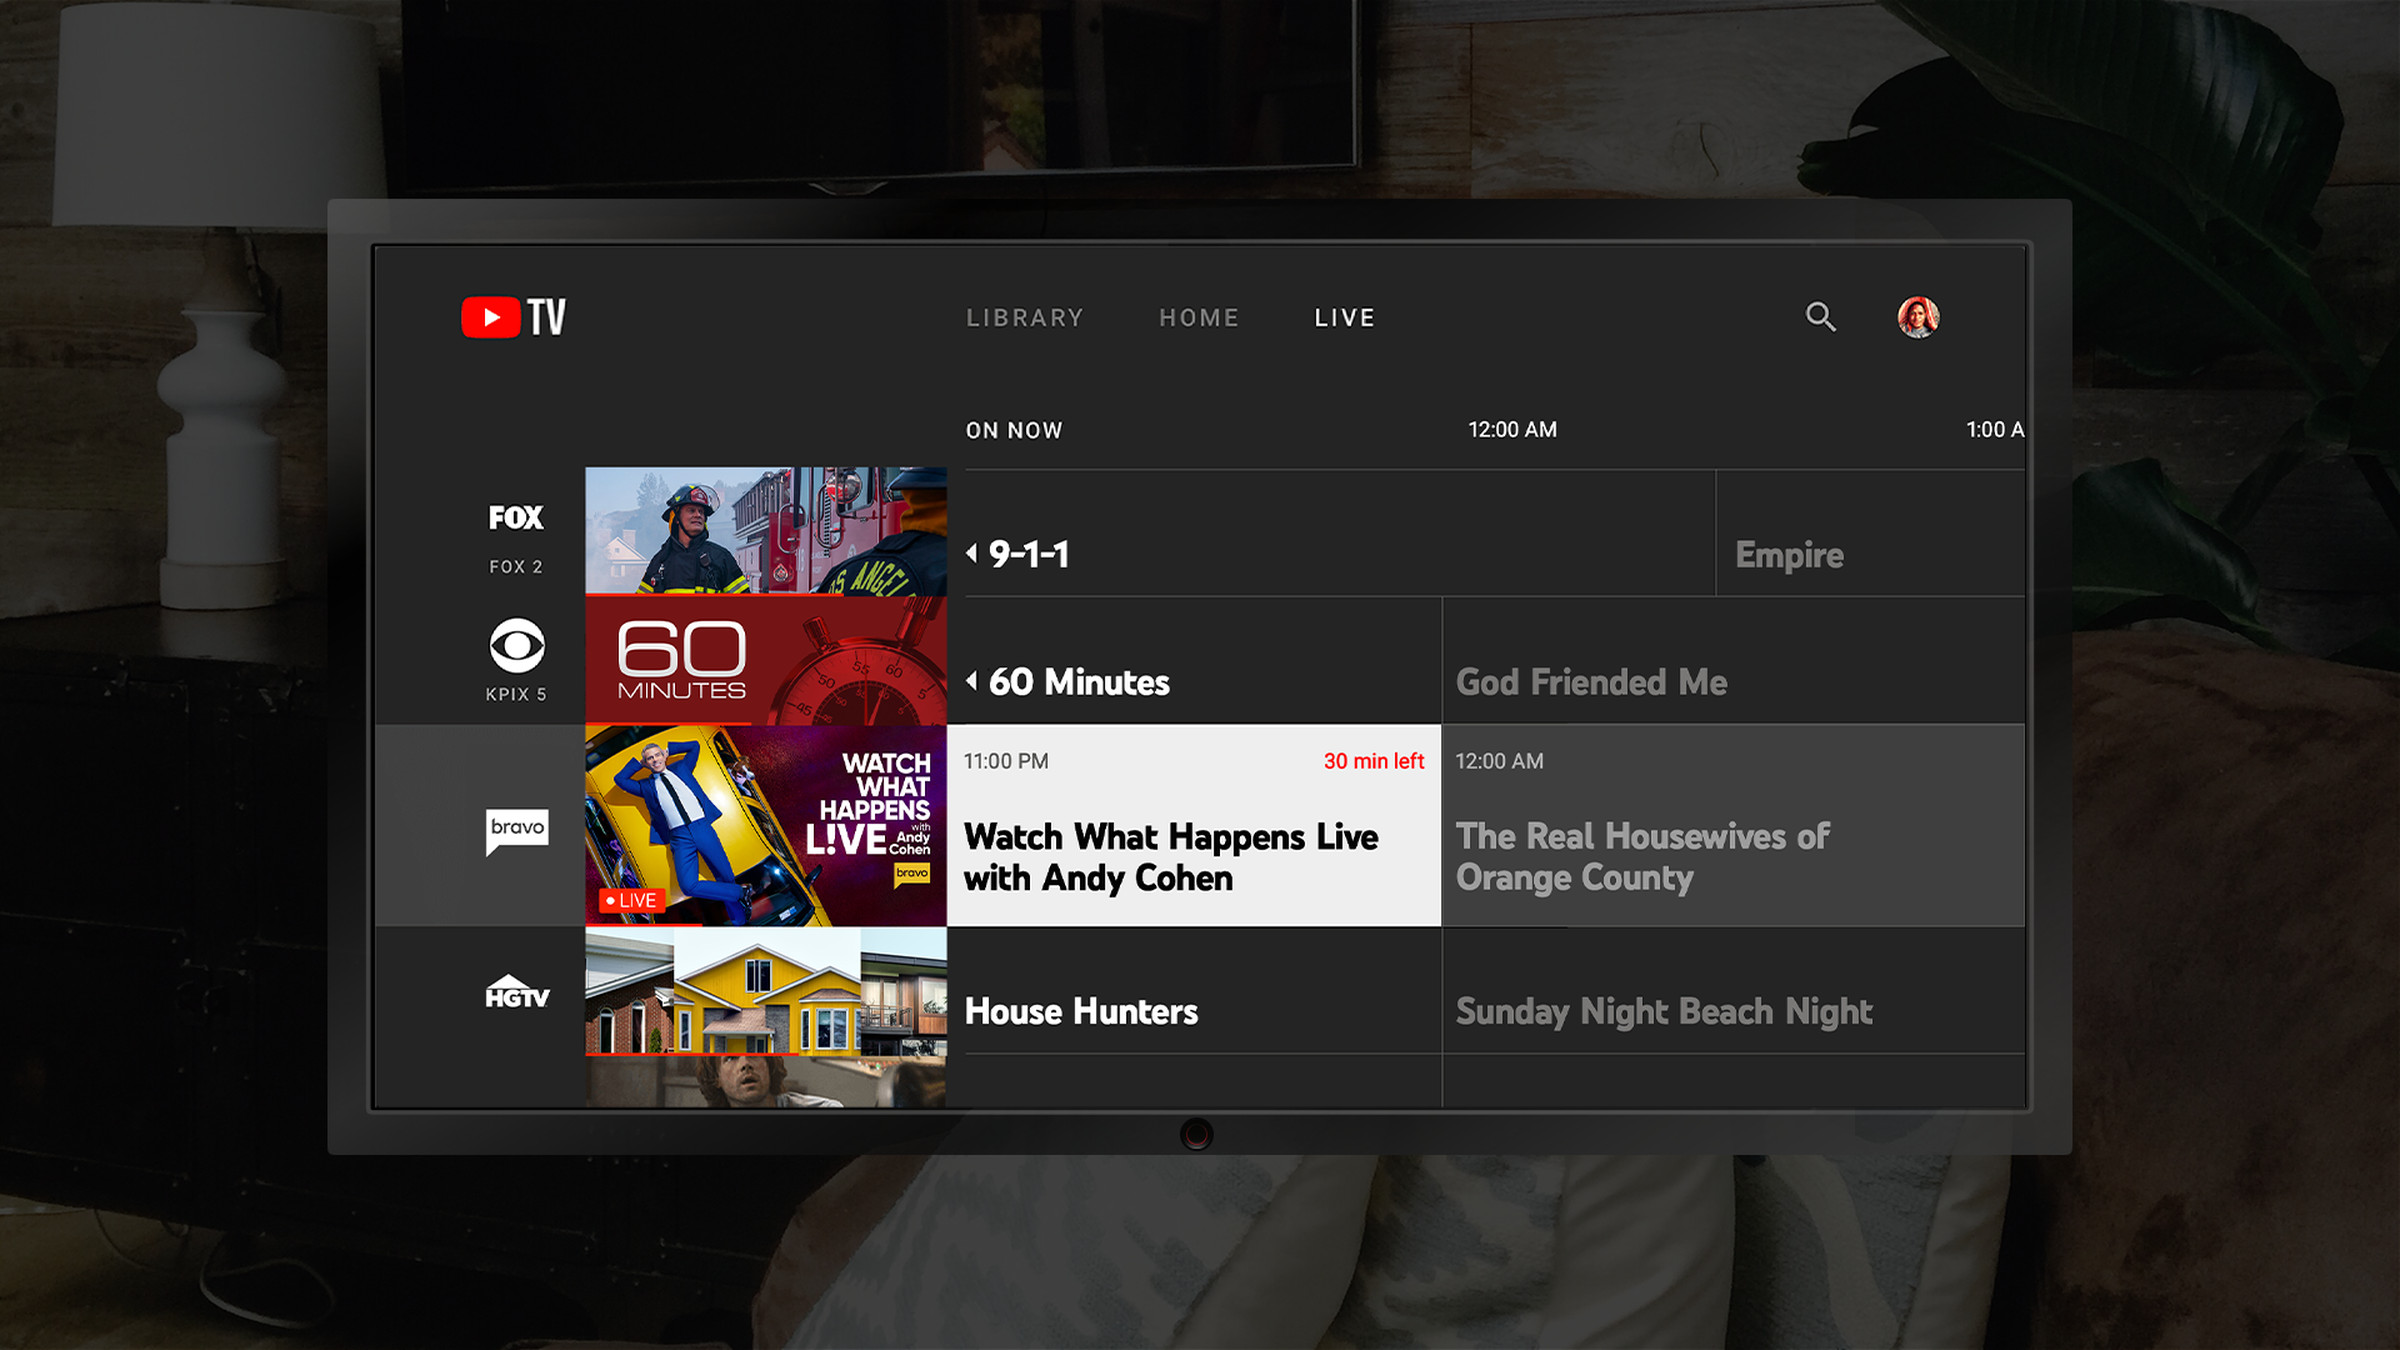 YouTube TV includes over 70 channels.